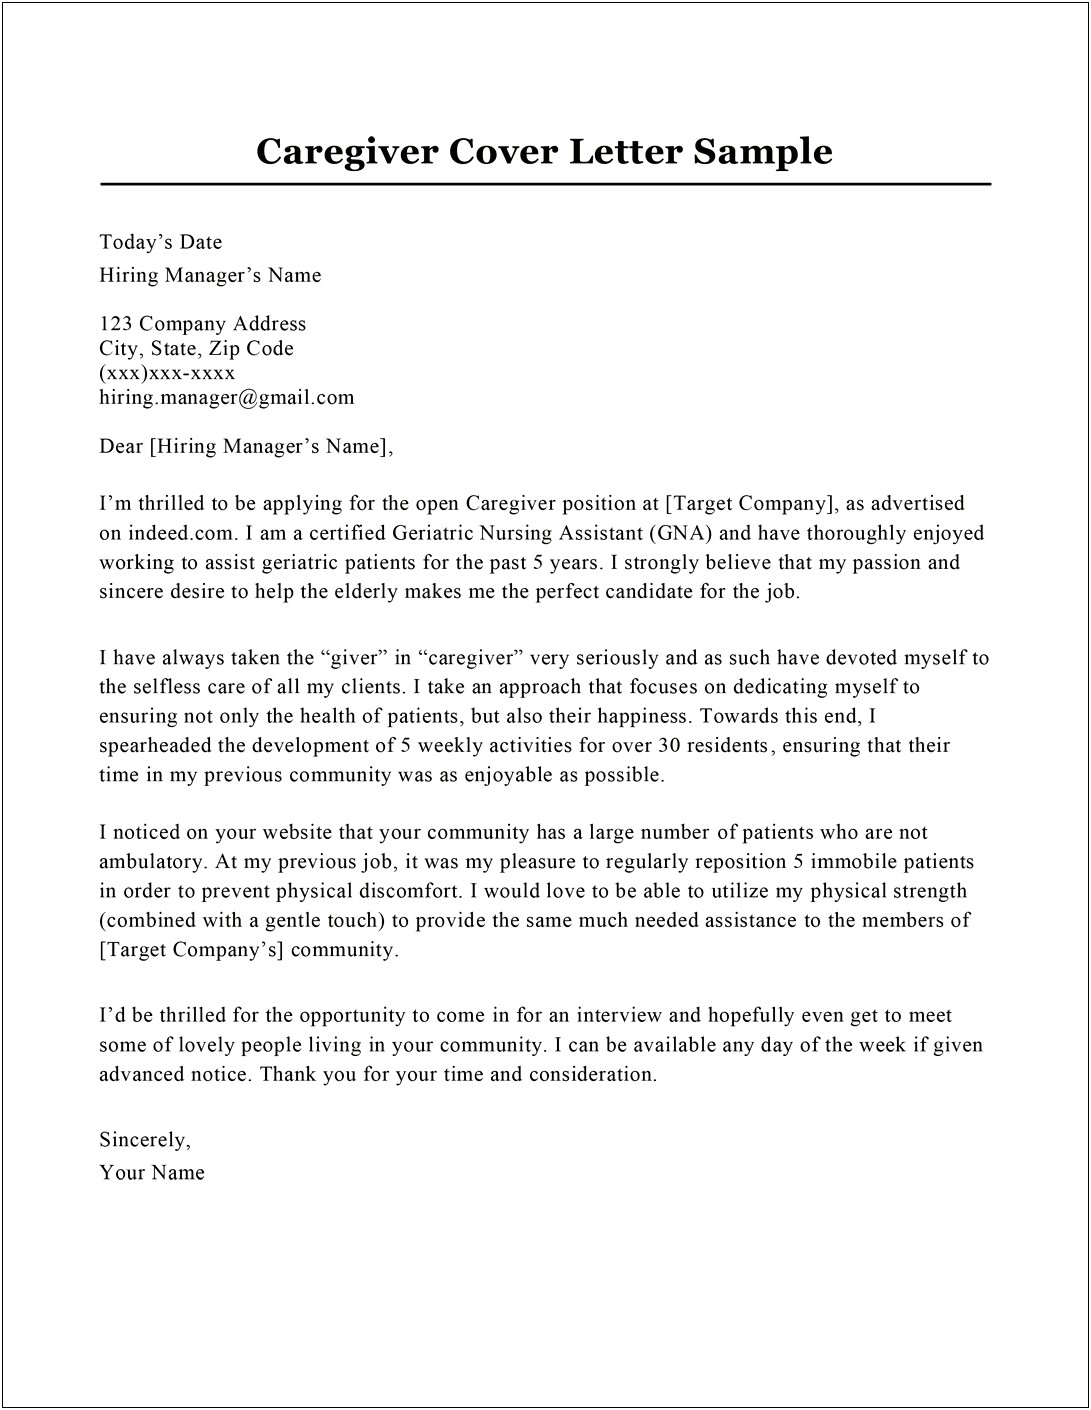 Resume Objective Daycare Cover Letter